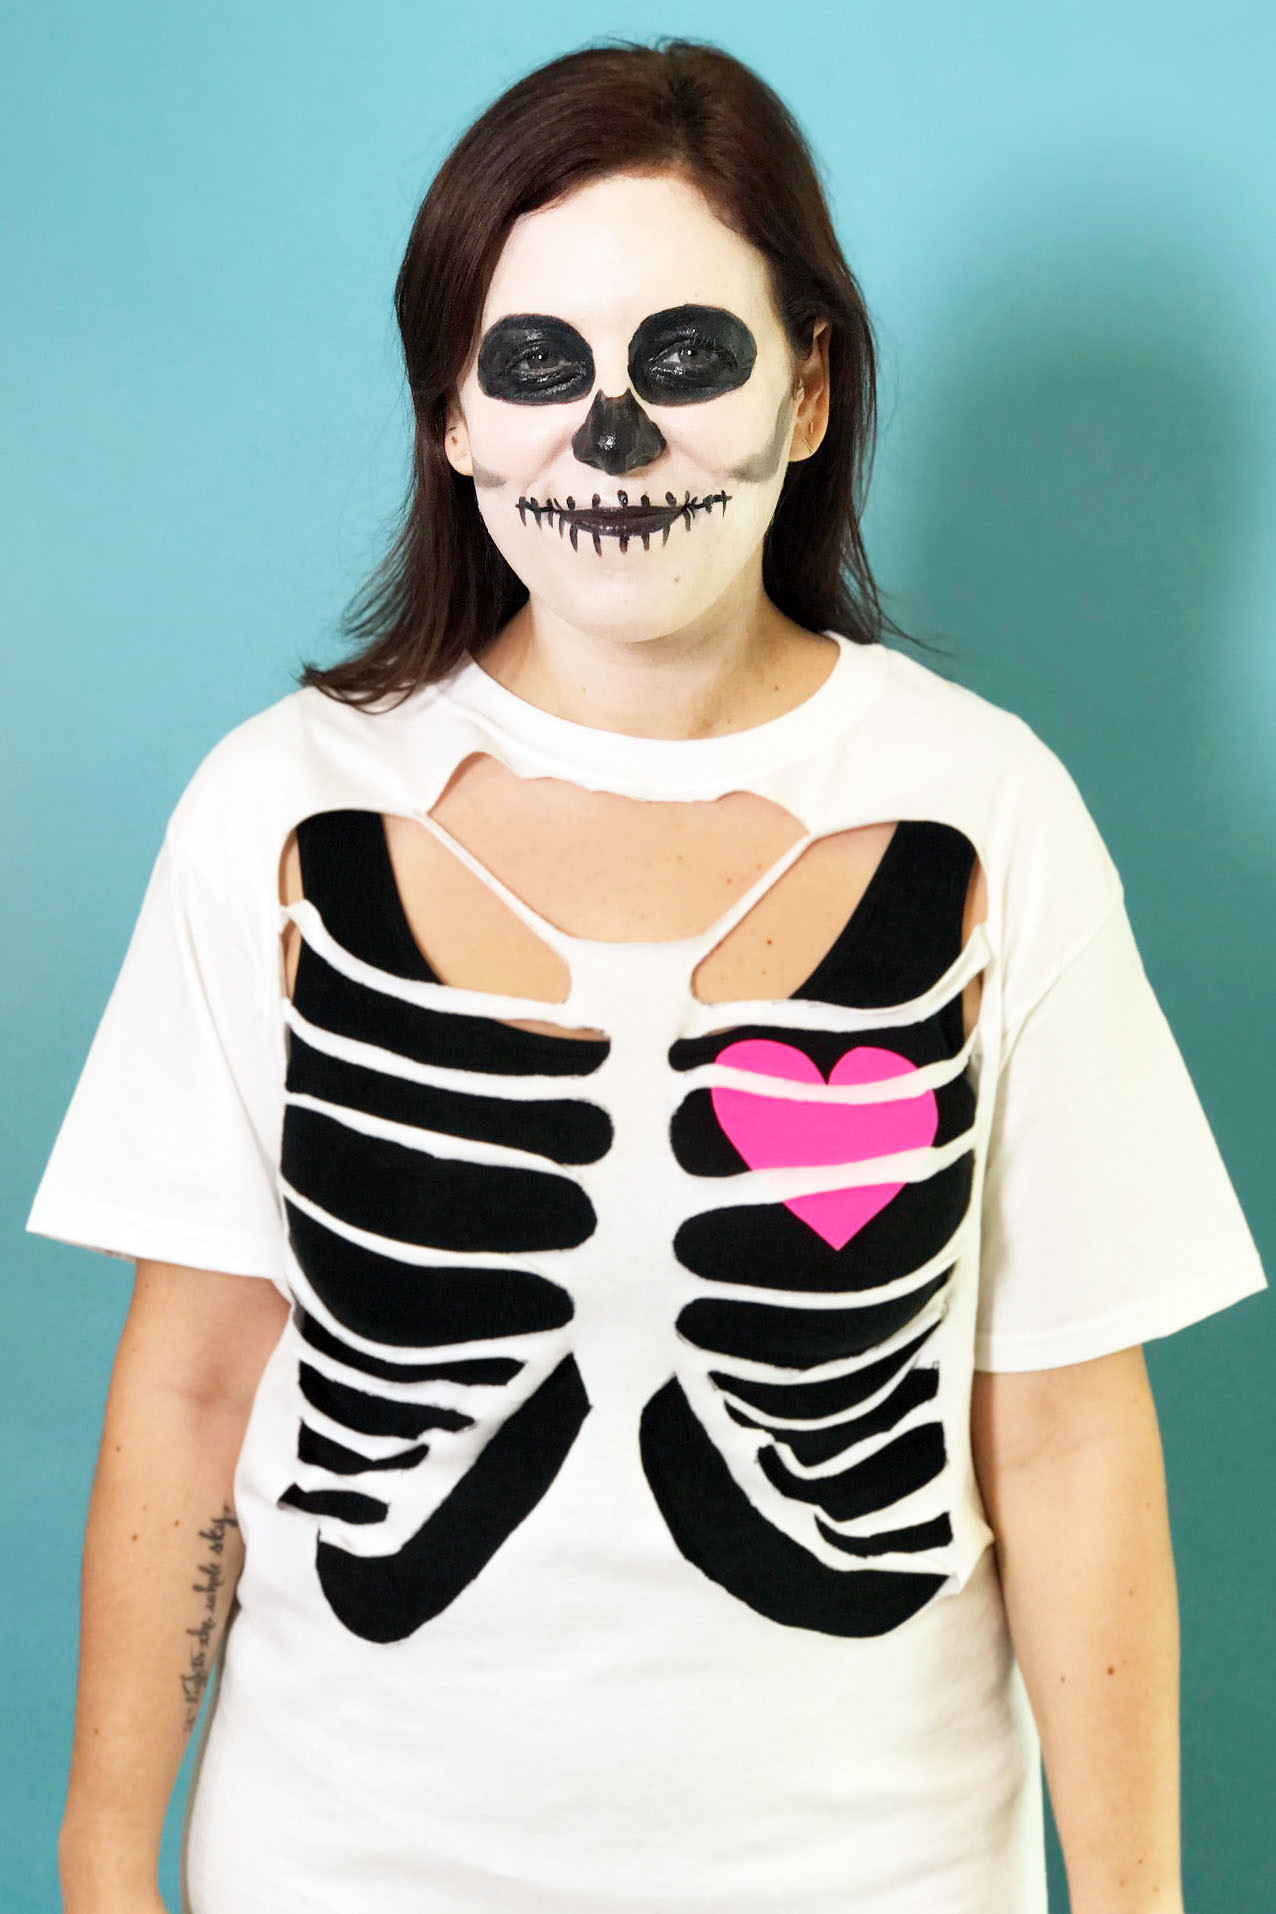 Skeleton Costume DIY
 40 Homemade Halloween Costumes for Adults & Kids Cool